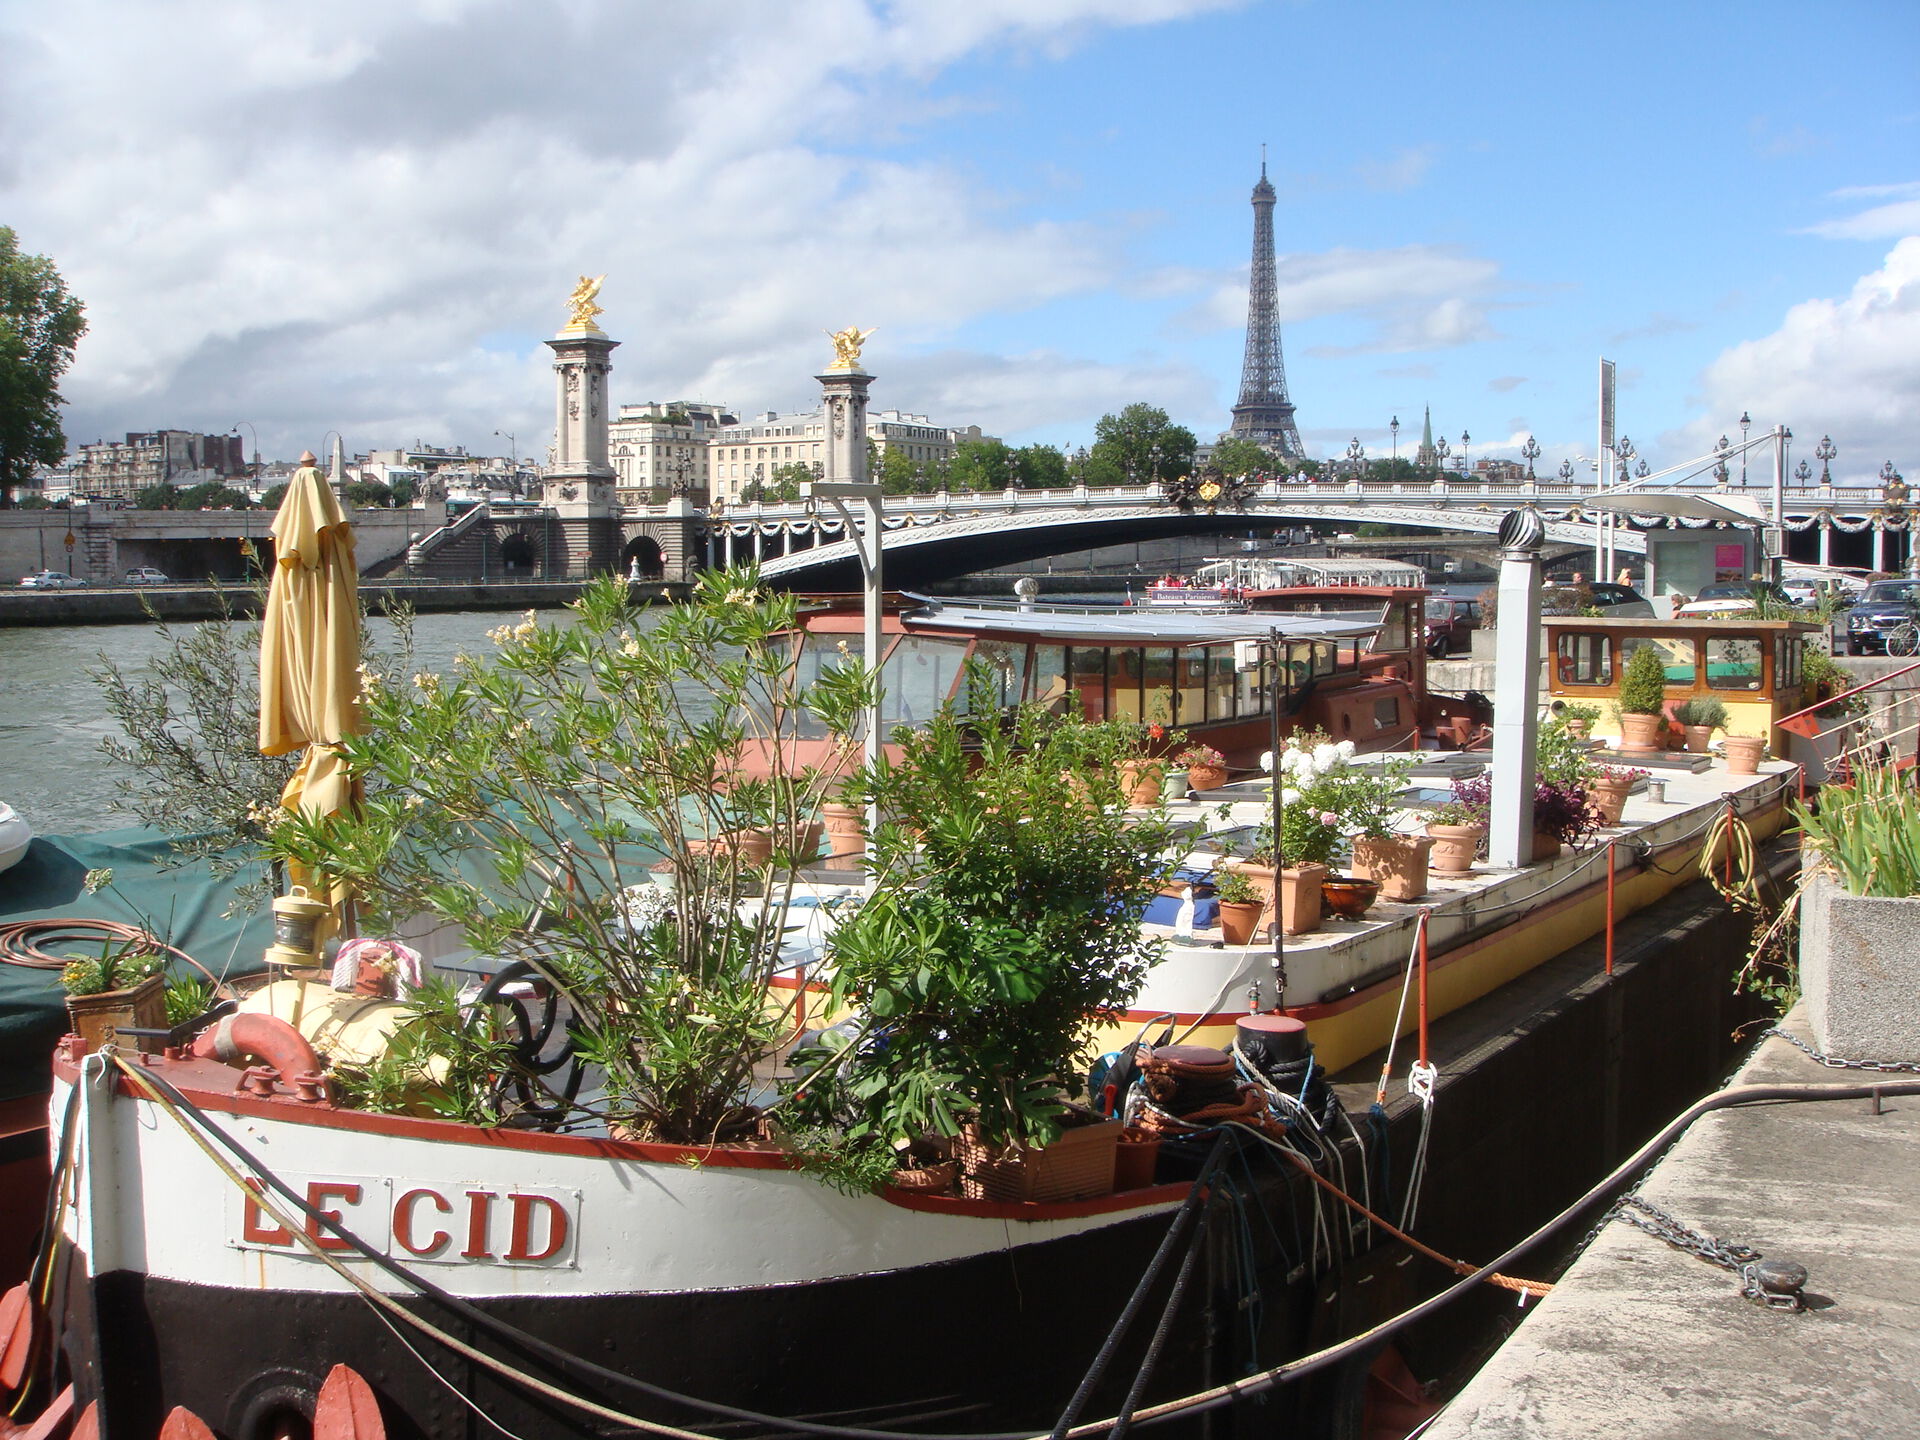 Photo from Paris with boat in the foreground and the Eifel Tower in the background